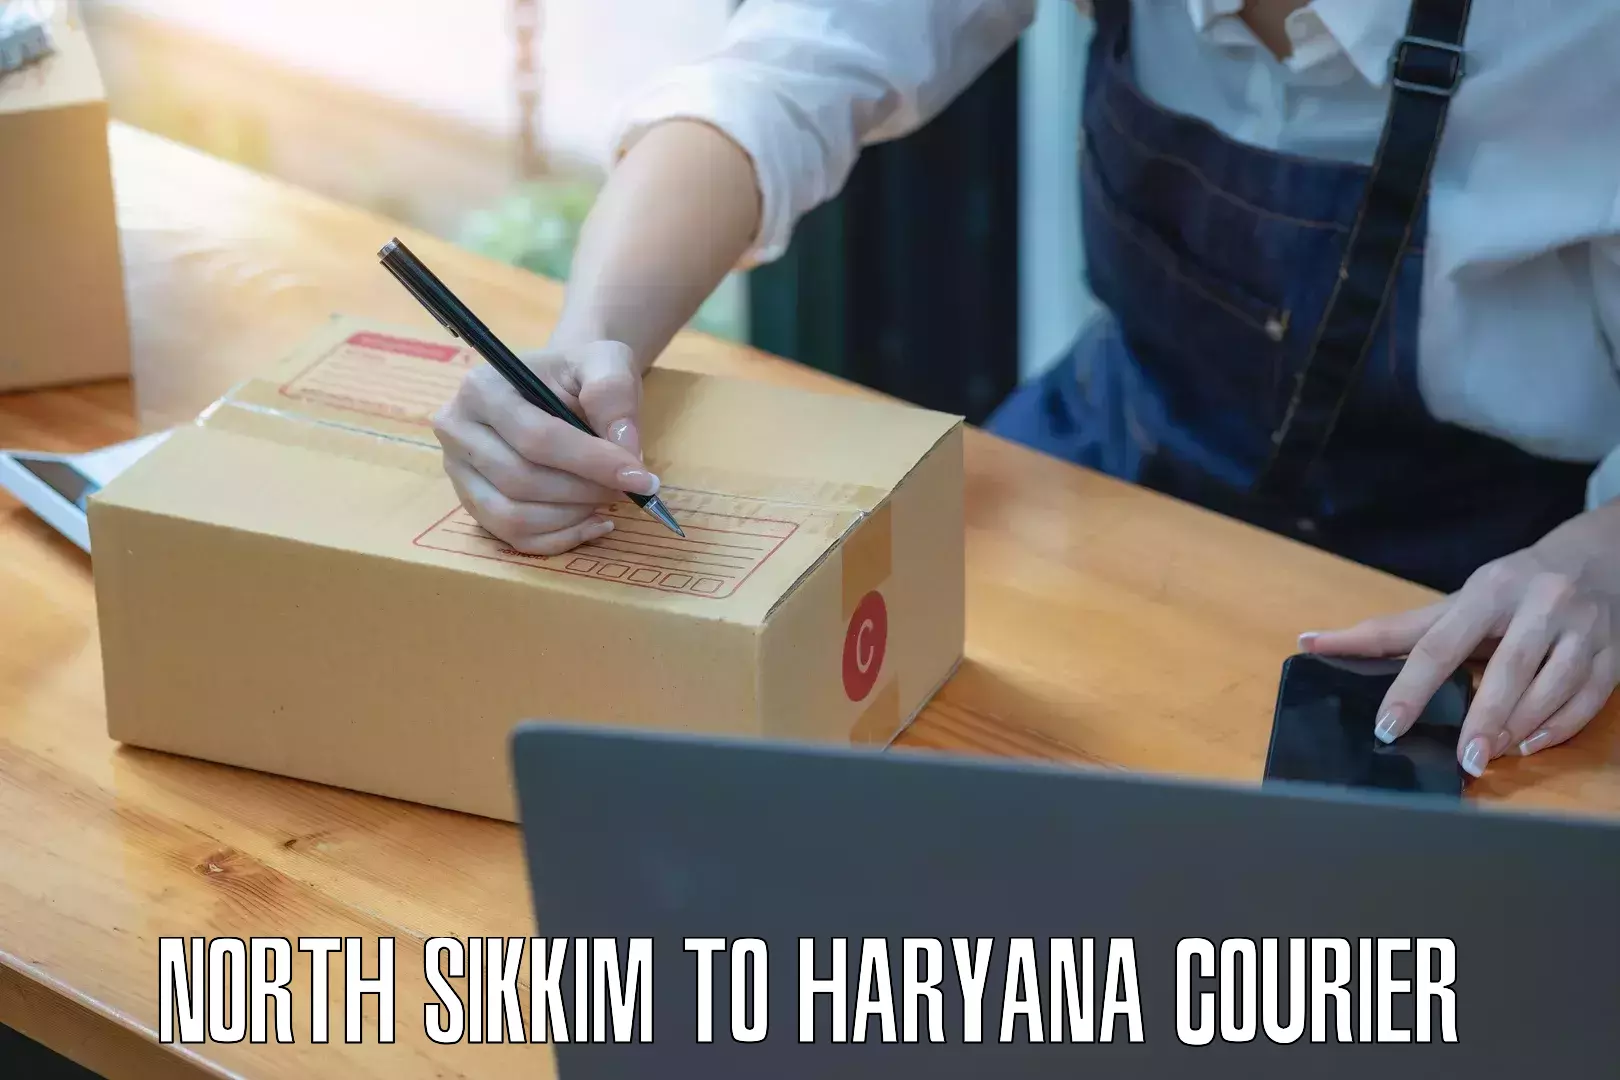 Easy access courier services North Sikkim to Gohana